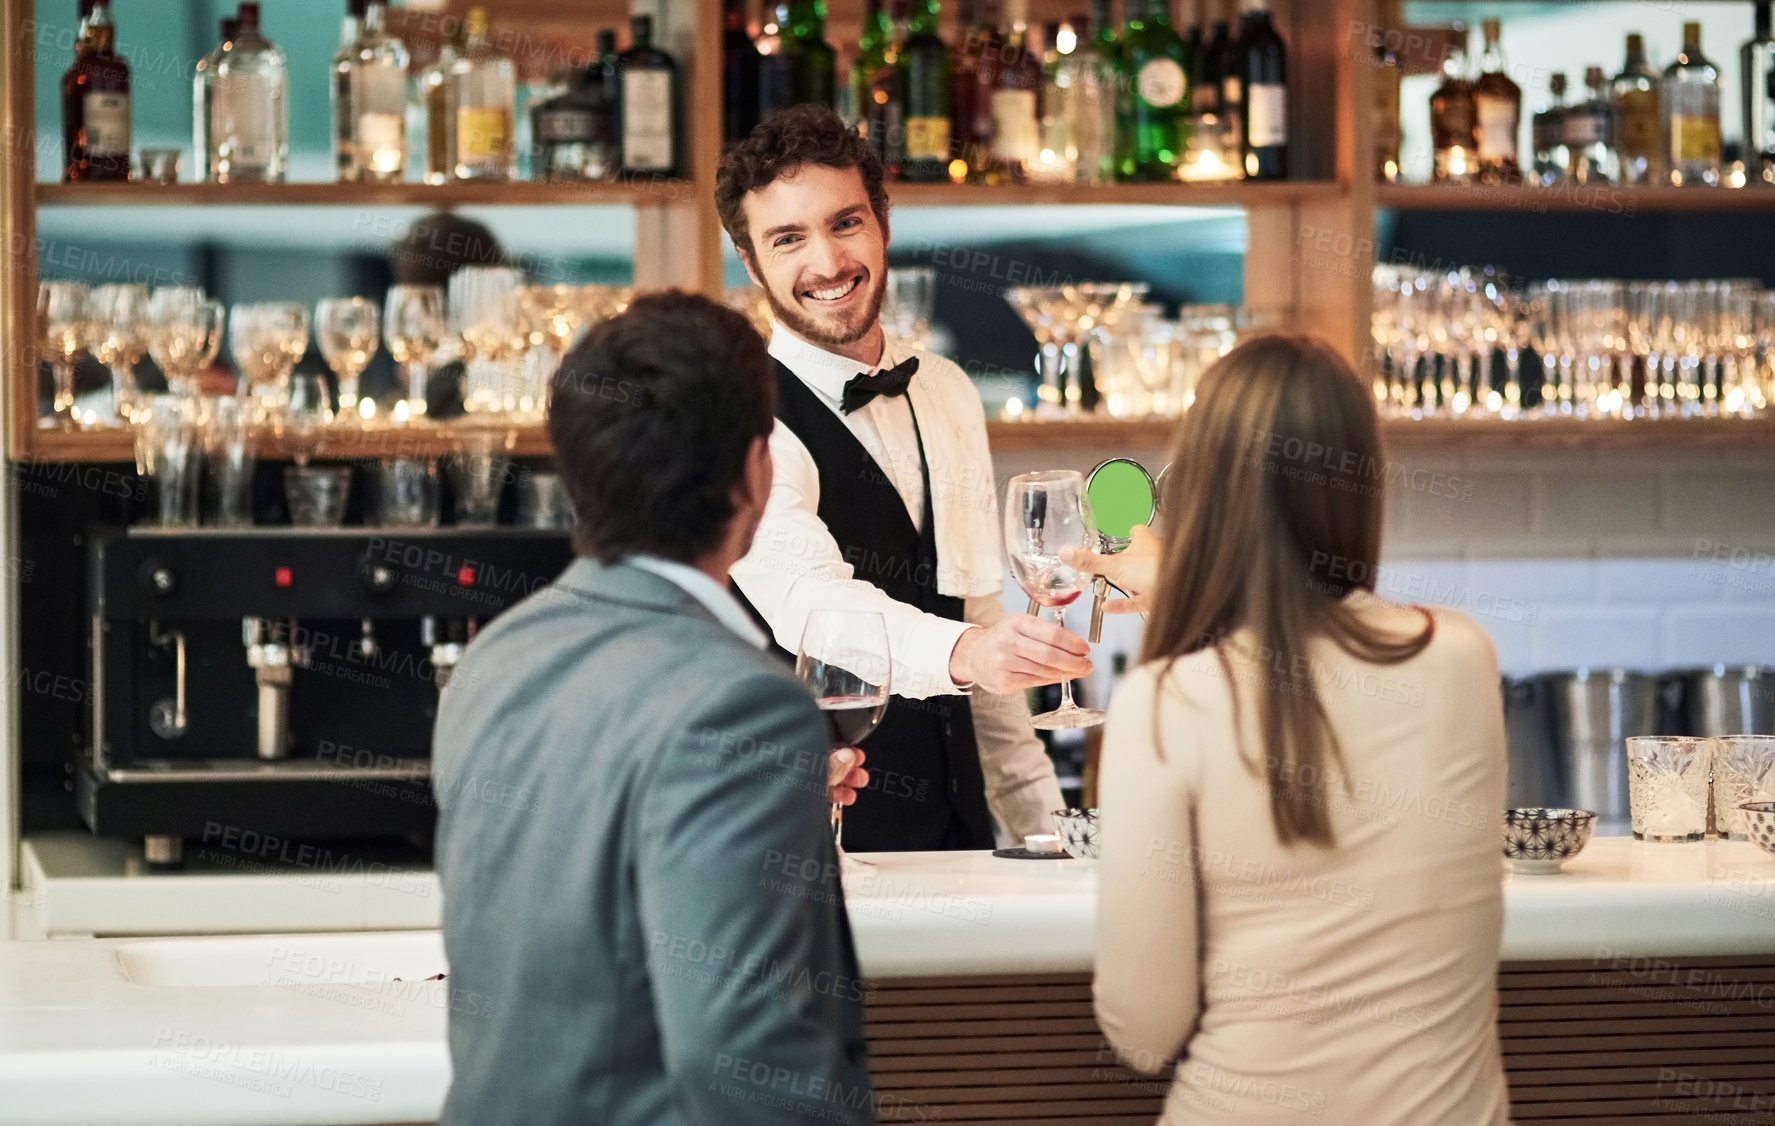 Buy stock photo Bar, barman and serve a couple alcohol drinks on a date with hospitality, happy and smile at a hotel. Waiter, bartender and server help customers or people with good service for a celebration